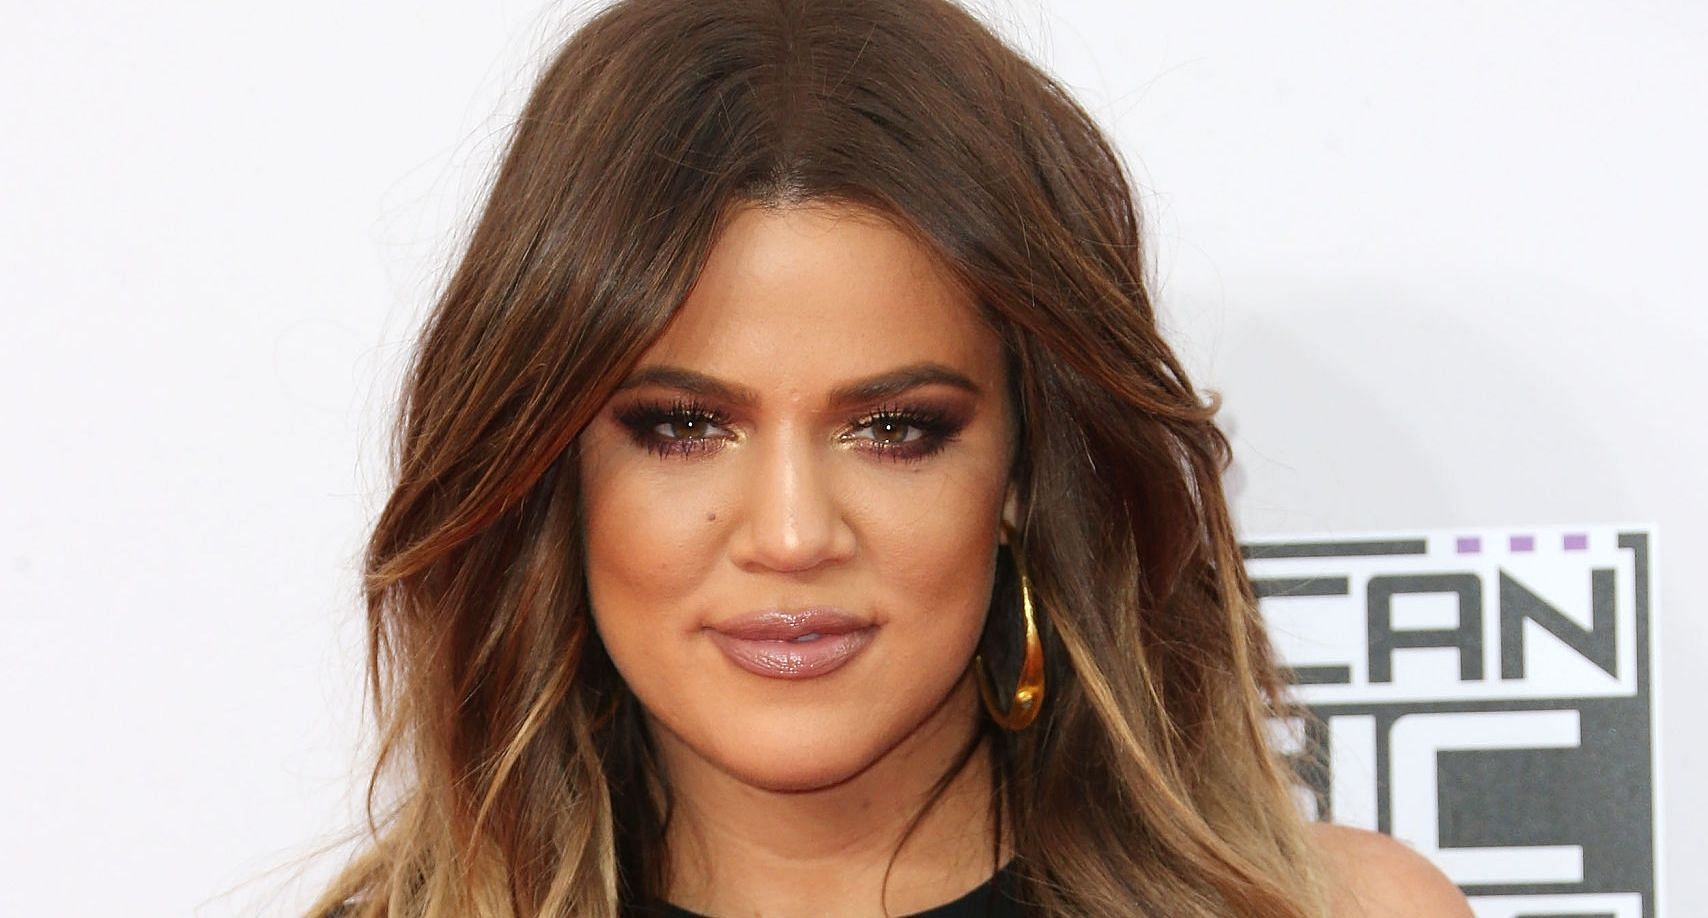 Khloe Kardashian landed in hot waters for past racially inappropriate comment (Image via Frederick M. Brown/Getty Images)